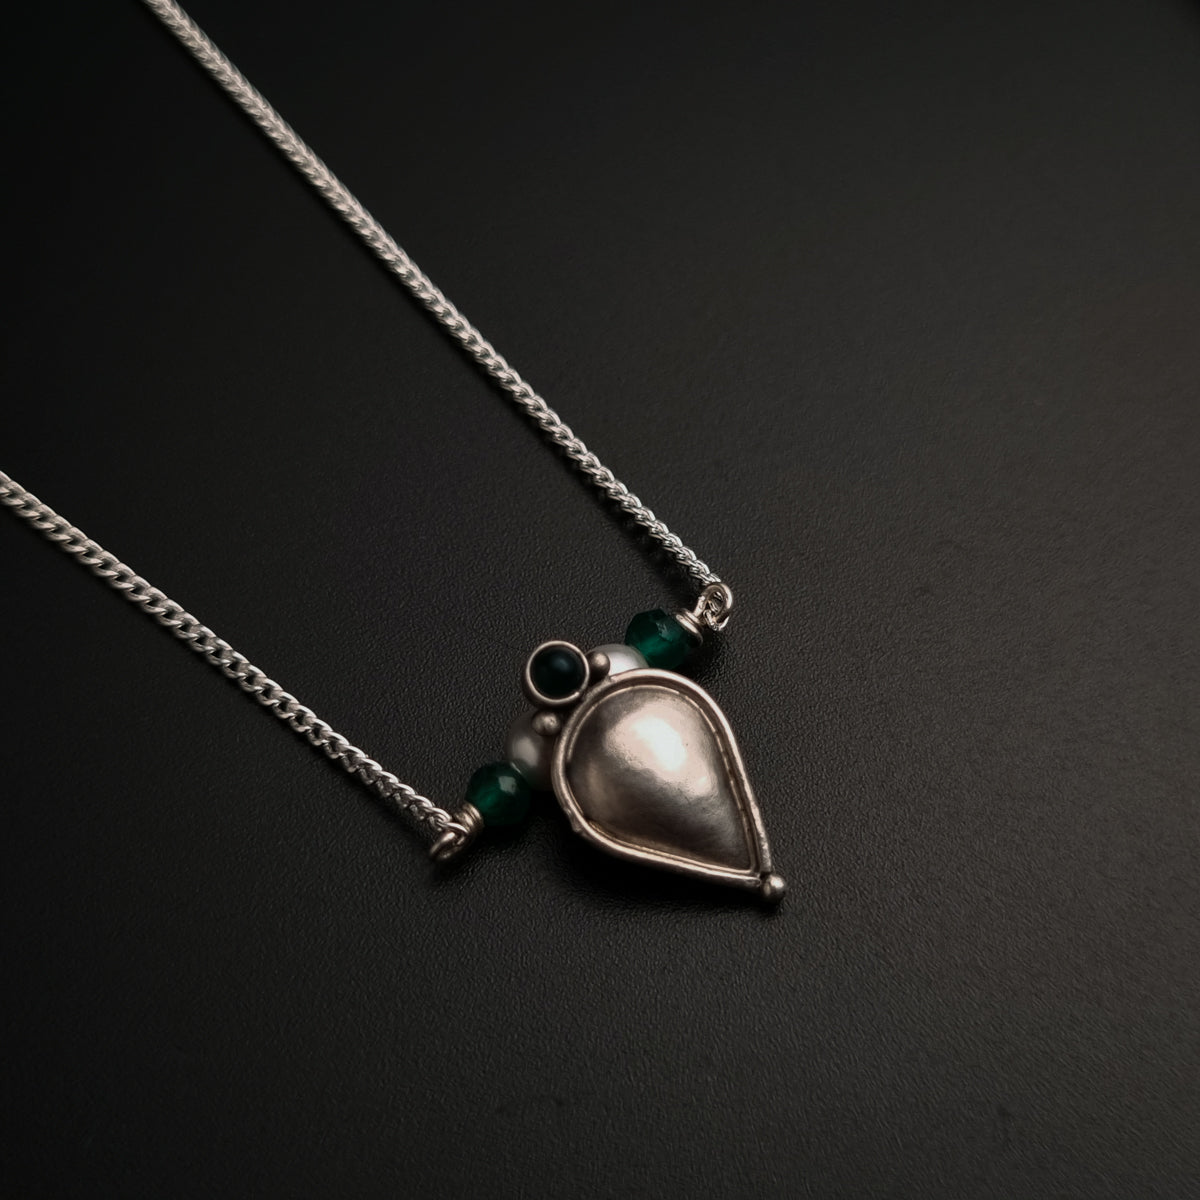 Drop Shape Necklace with Peral and Green Onyx